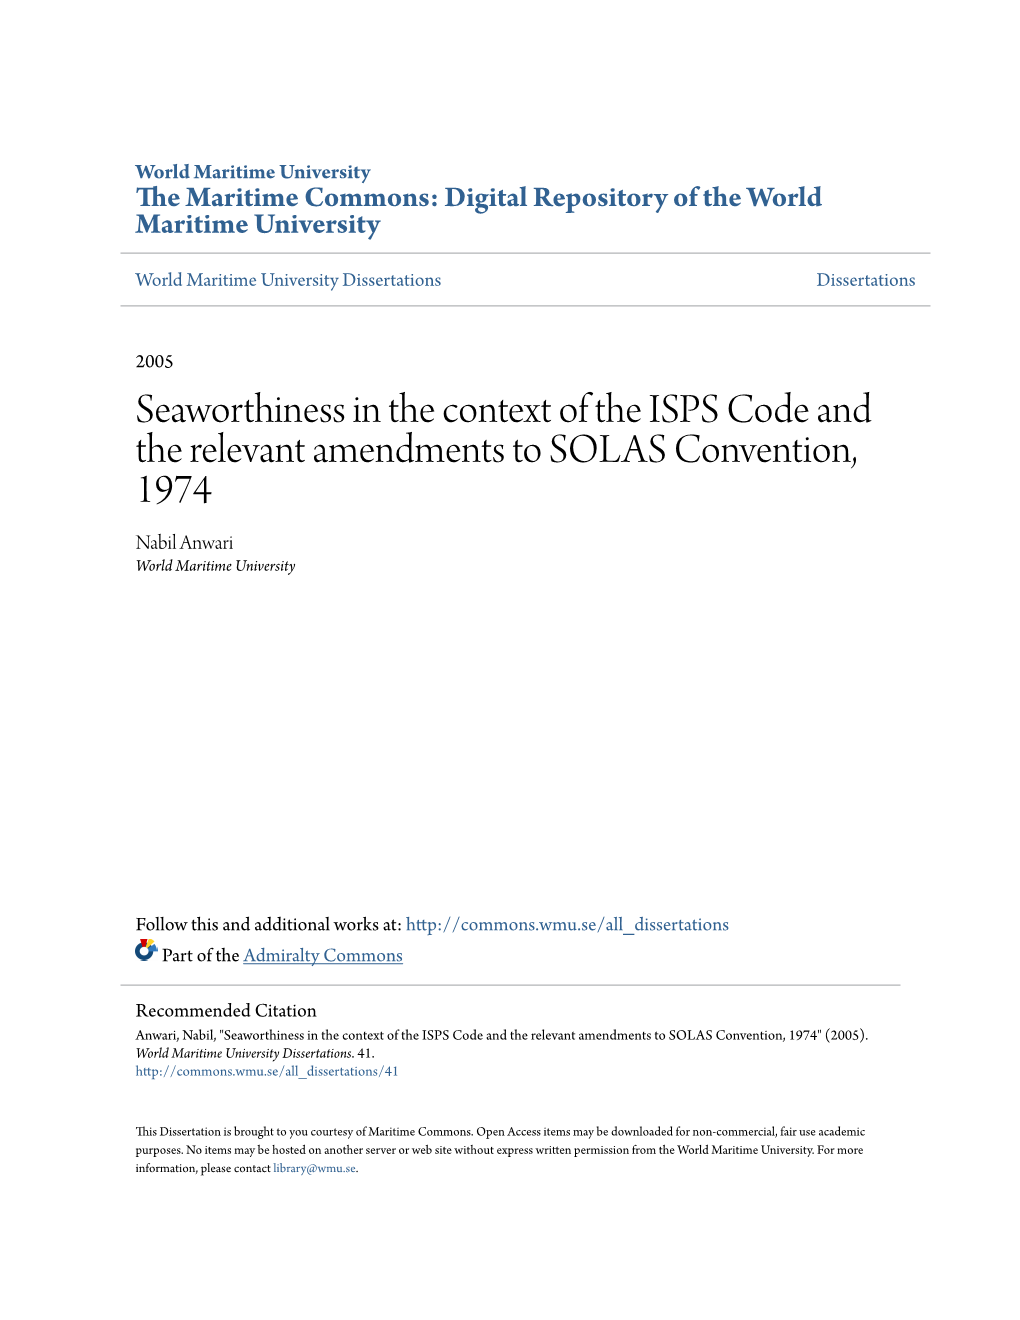 Seaworthiness in the Context of the ISPS Code and the Relevant Amendments to SOLAS Convention, 1974 Nabil Anwari World Maritime University